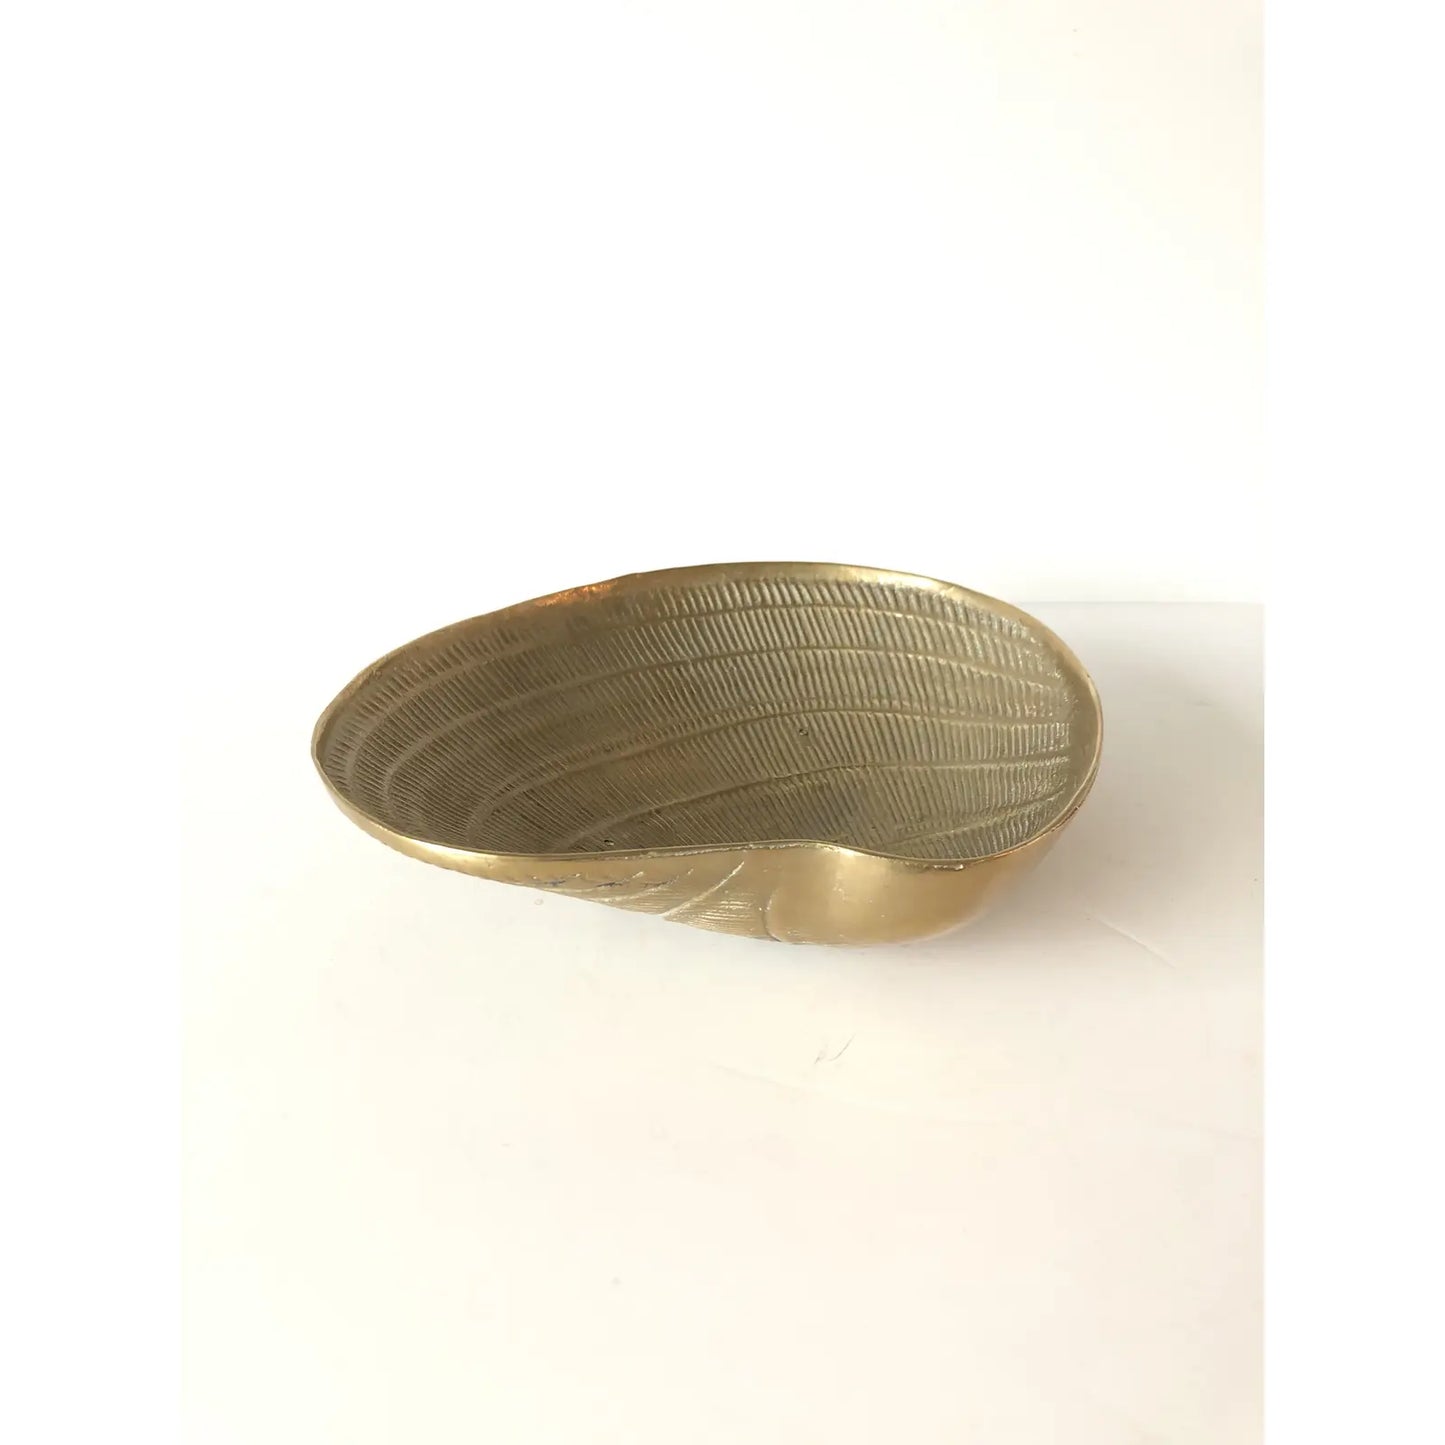 Large vintage 1970s Solid Brass Clam Shell Bowl Display Dish With Feet